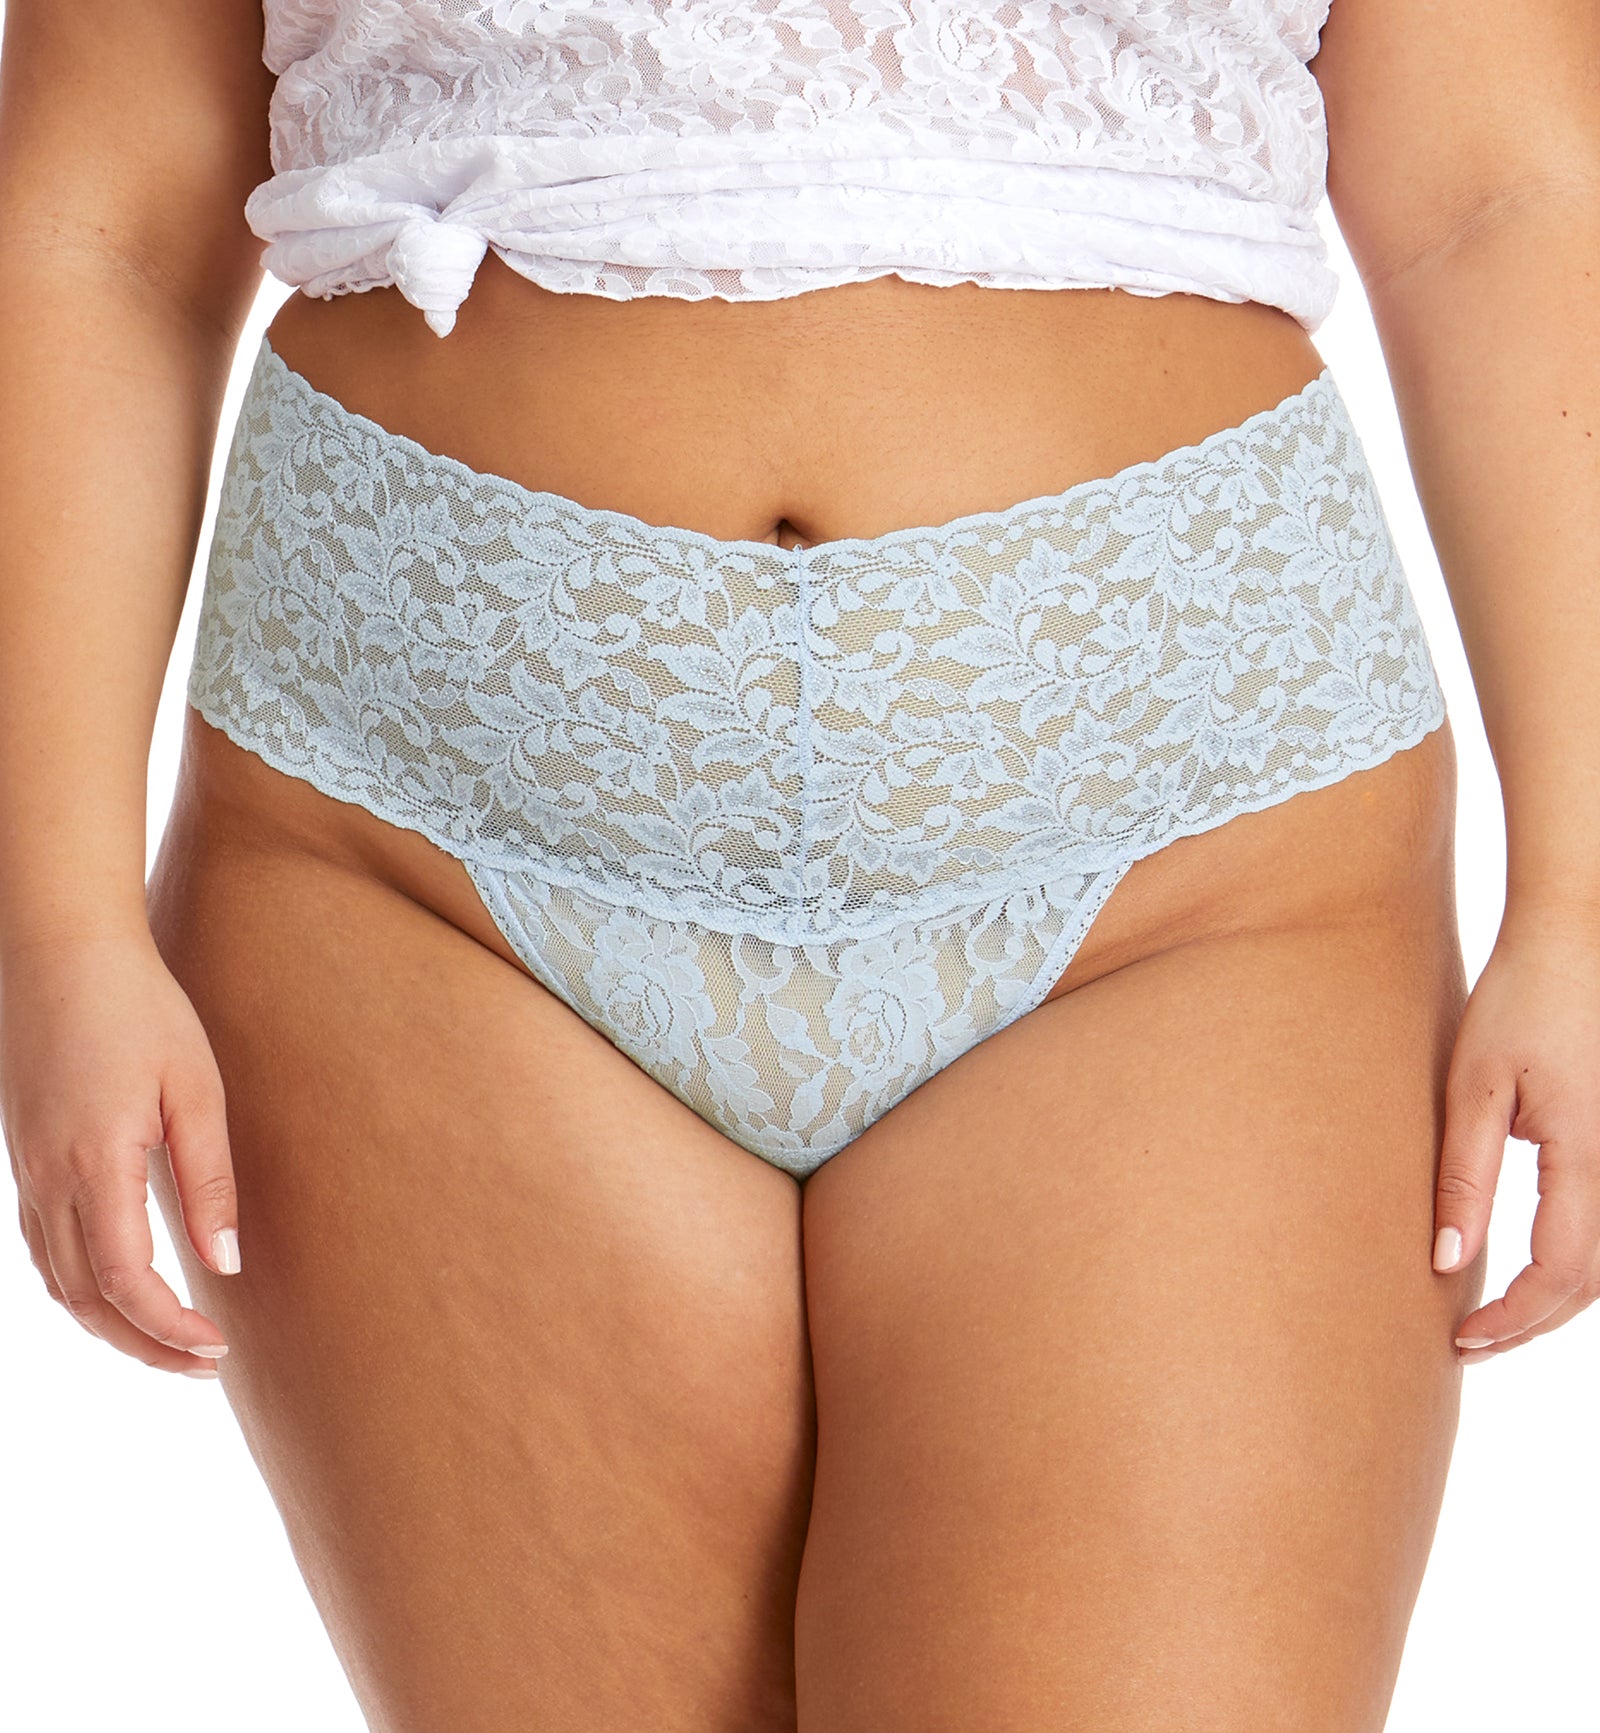 Hanky Panky Plus Size Retro Lace Thong (9K1926X),Partly Cloudy - Partly Cloudy,One Size